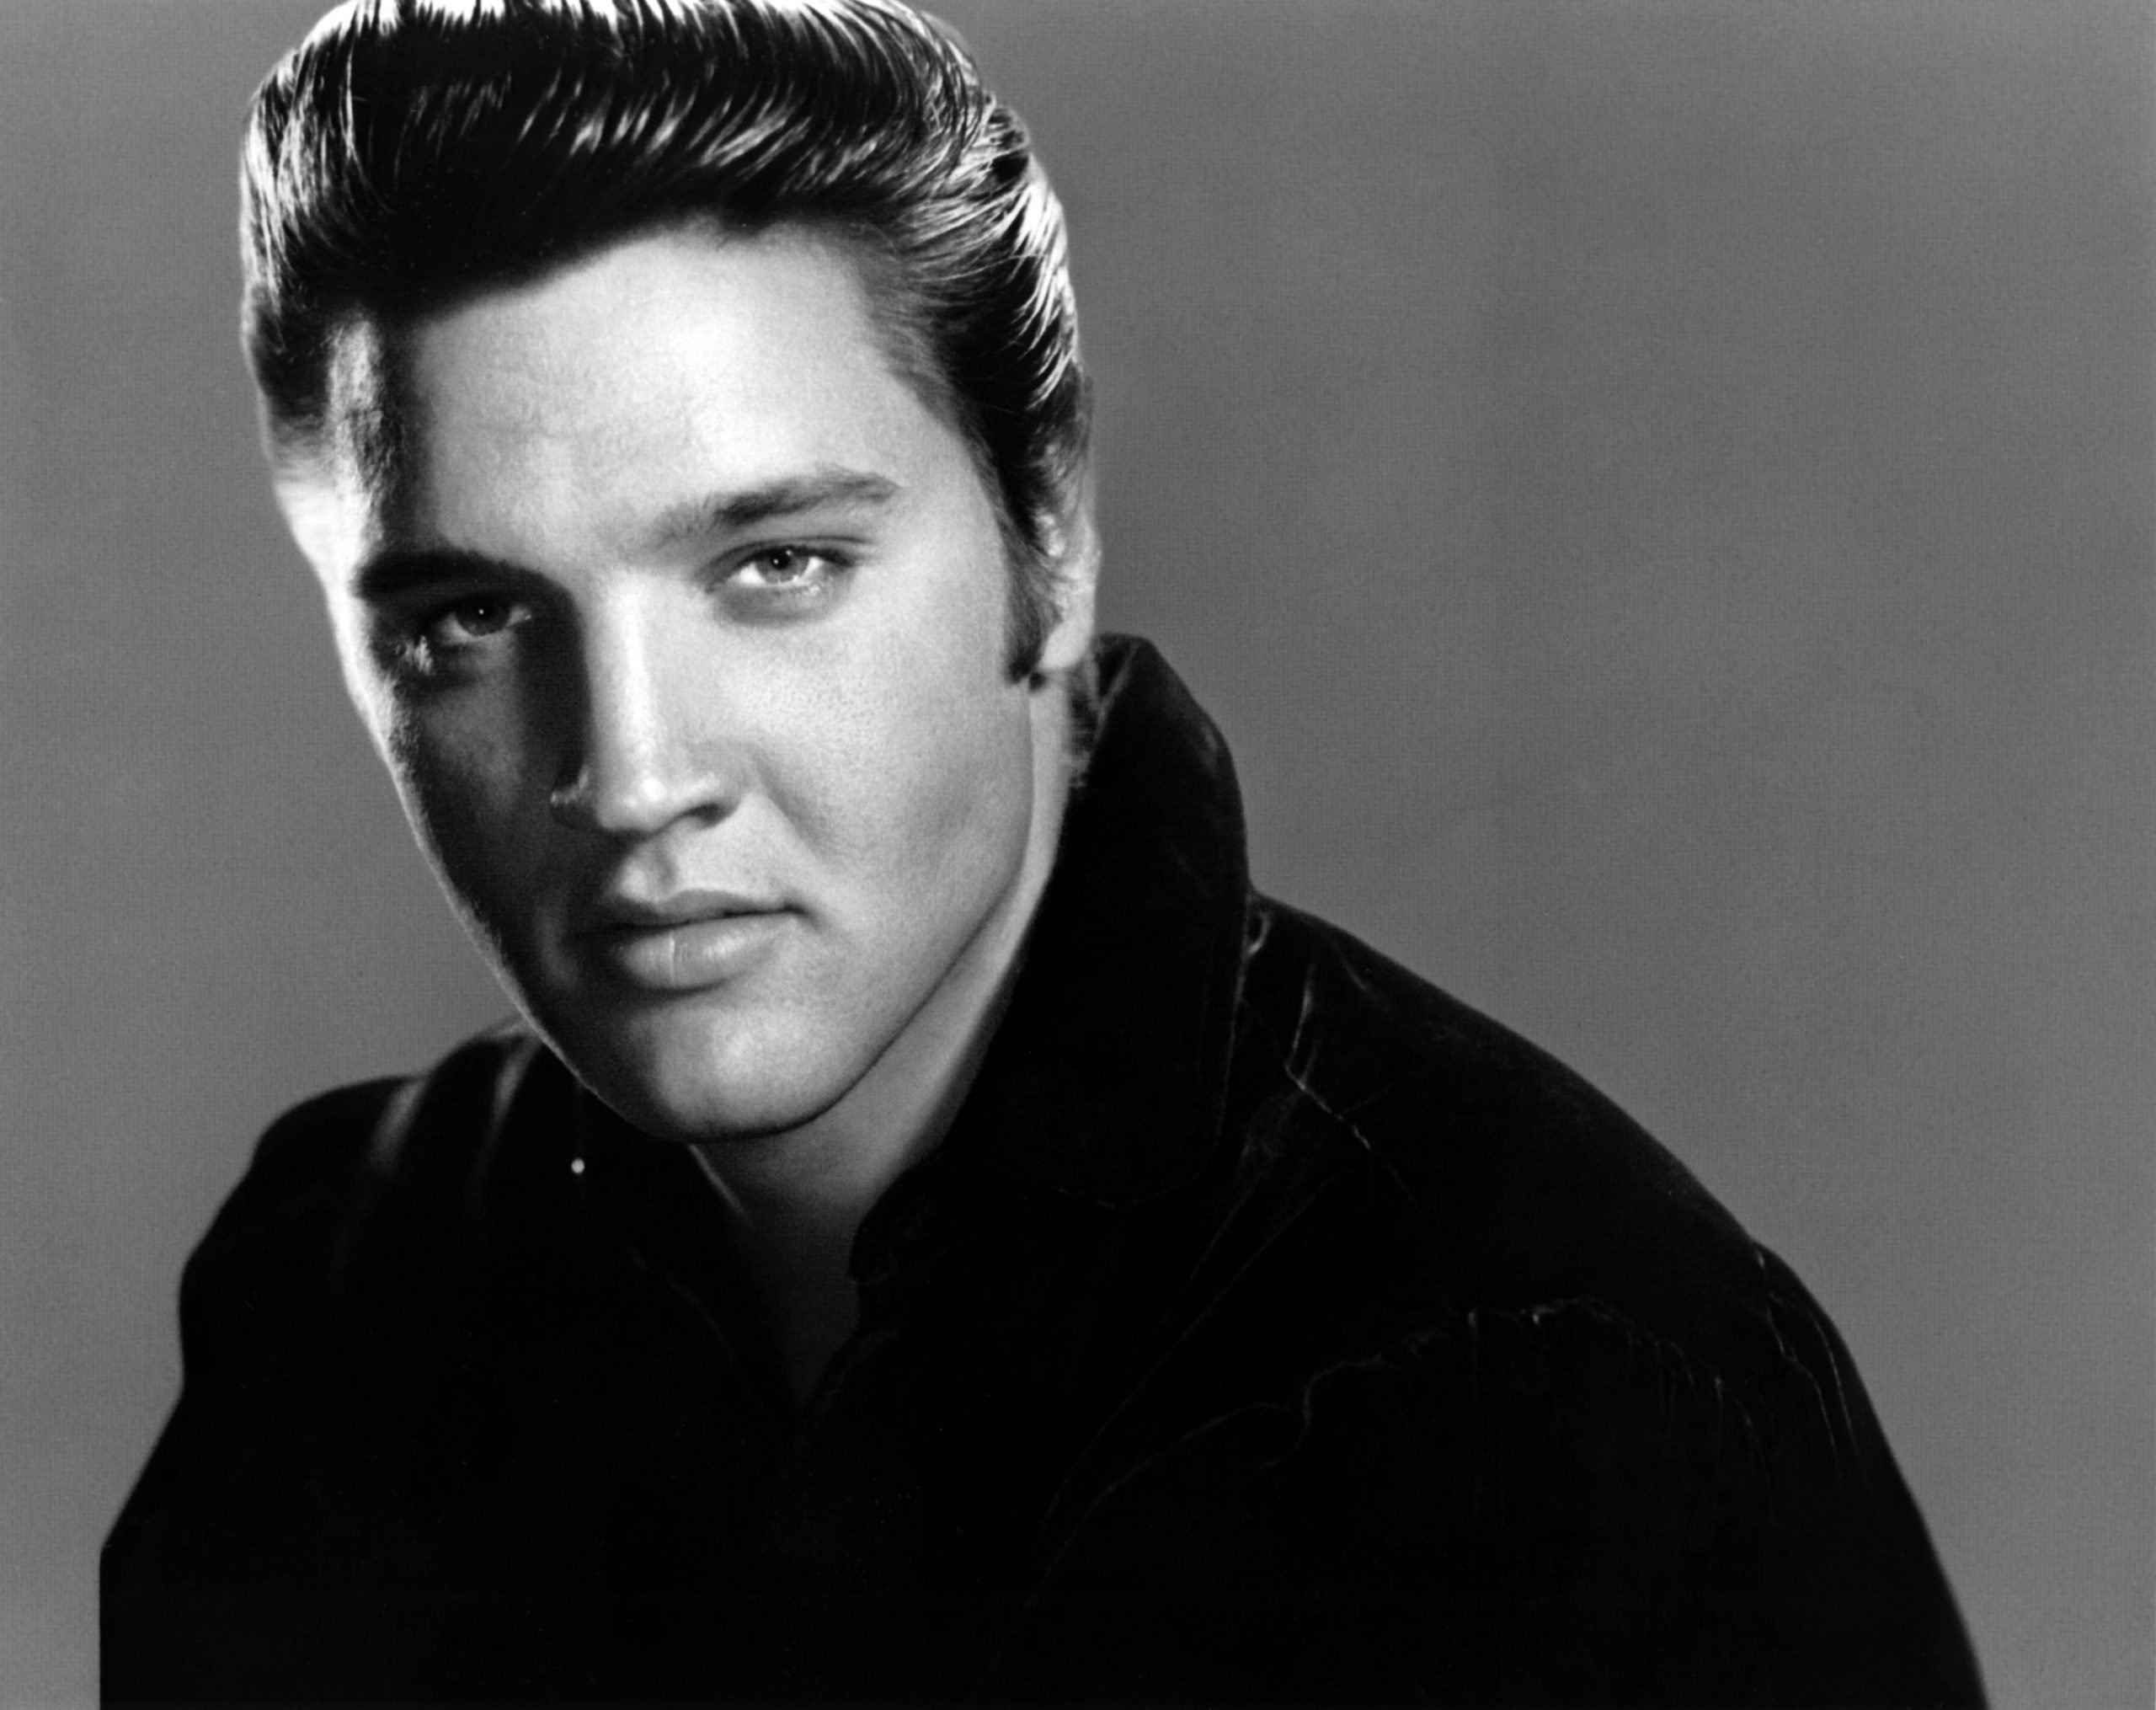 Elvis Presley's death and burial almost led to a ransom